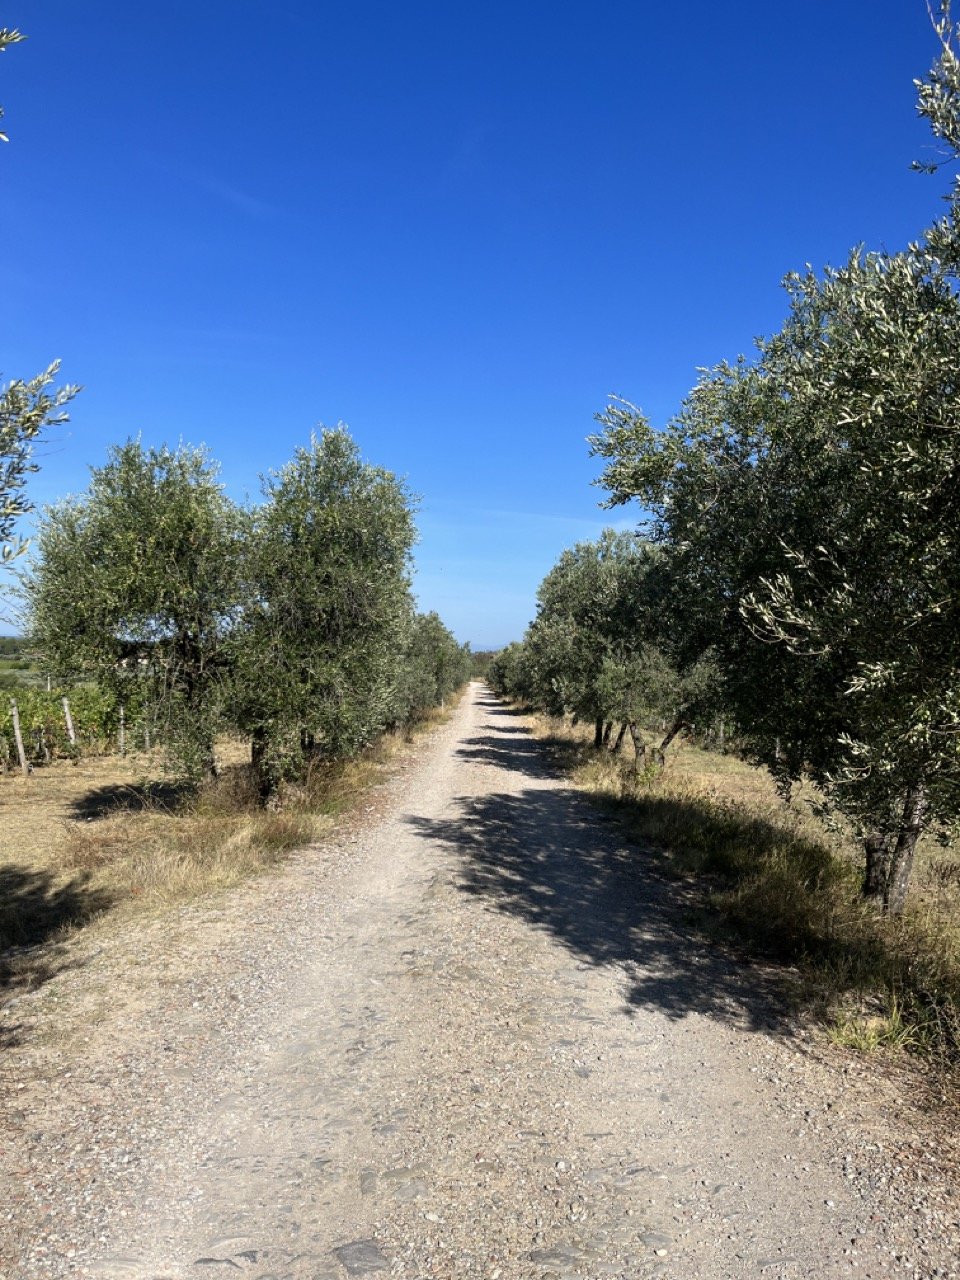 A gravel path lined by olive trees and vineyards in the Chianti countryside of Tuscany, Italy.